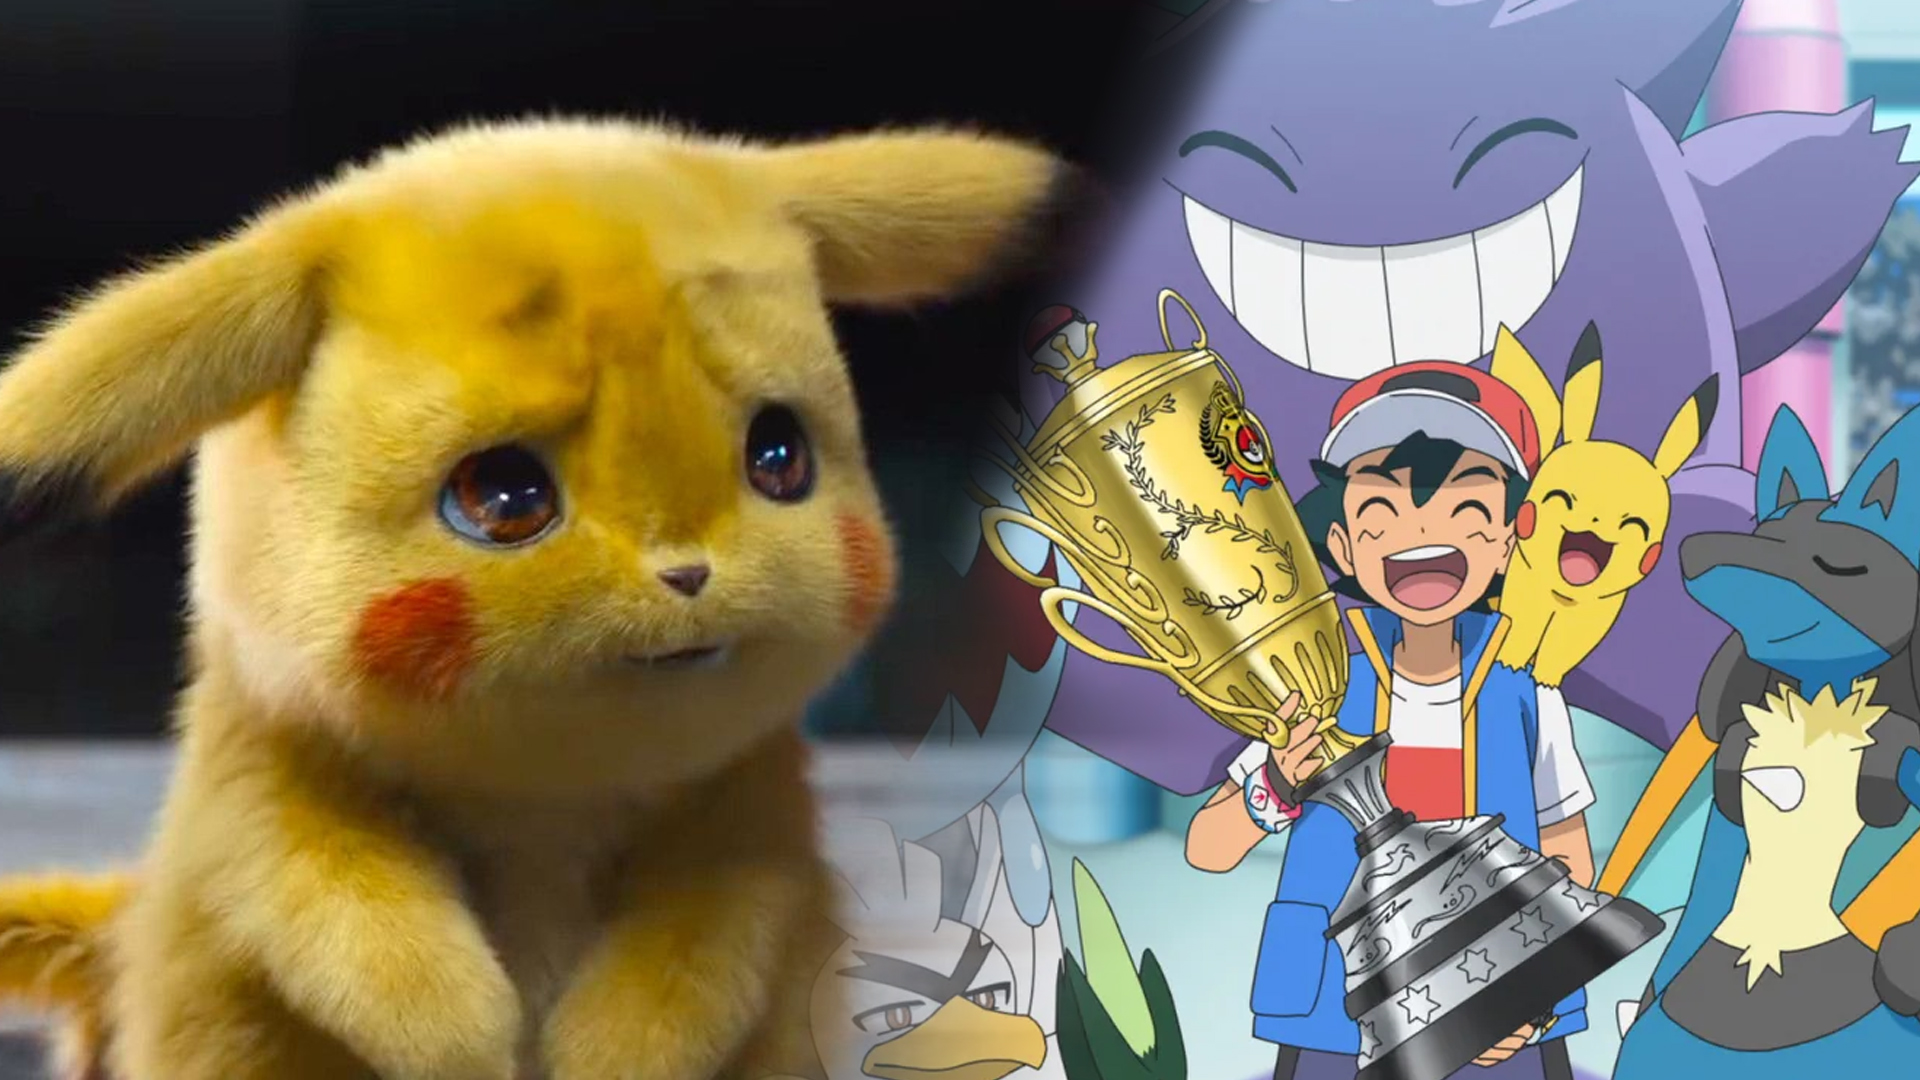 What do you think would be the end of the Pokemon world in the Pokemon anime   Quora